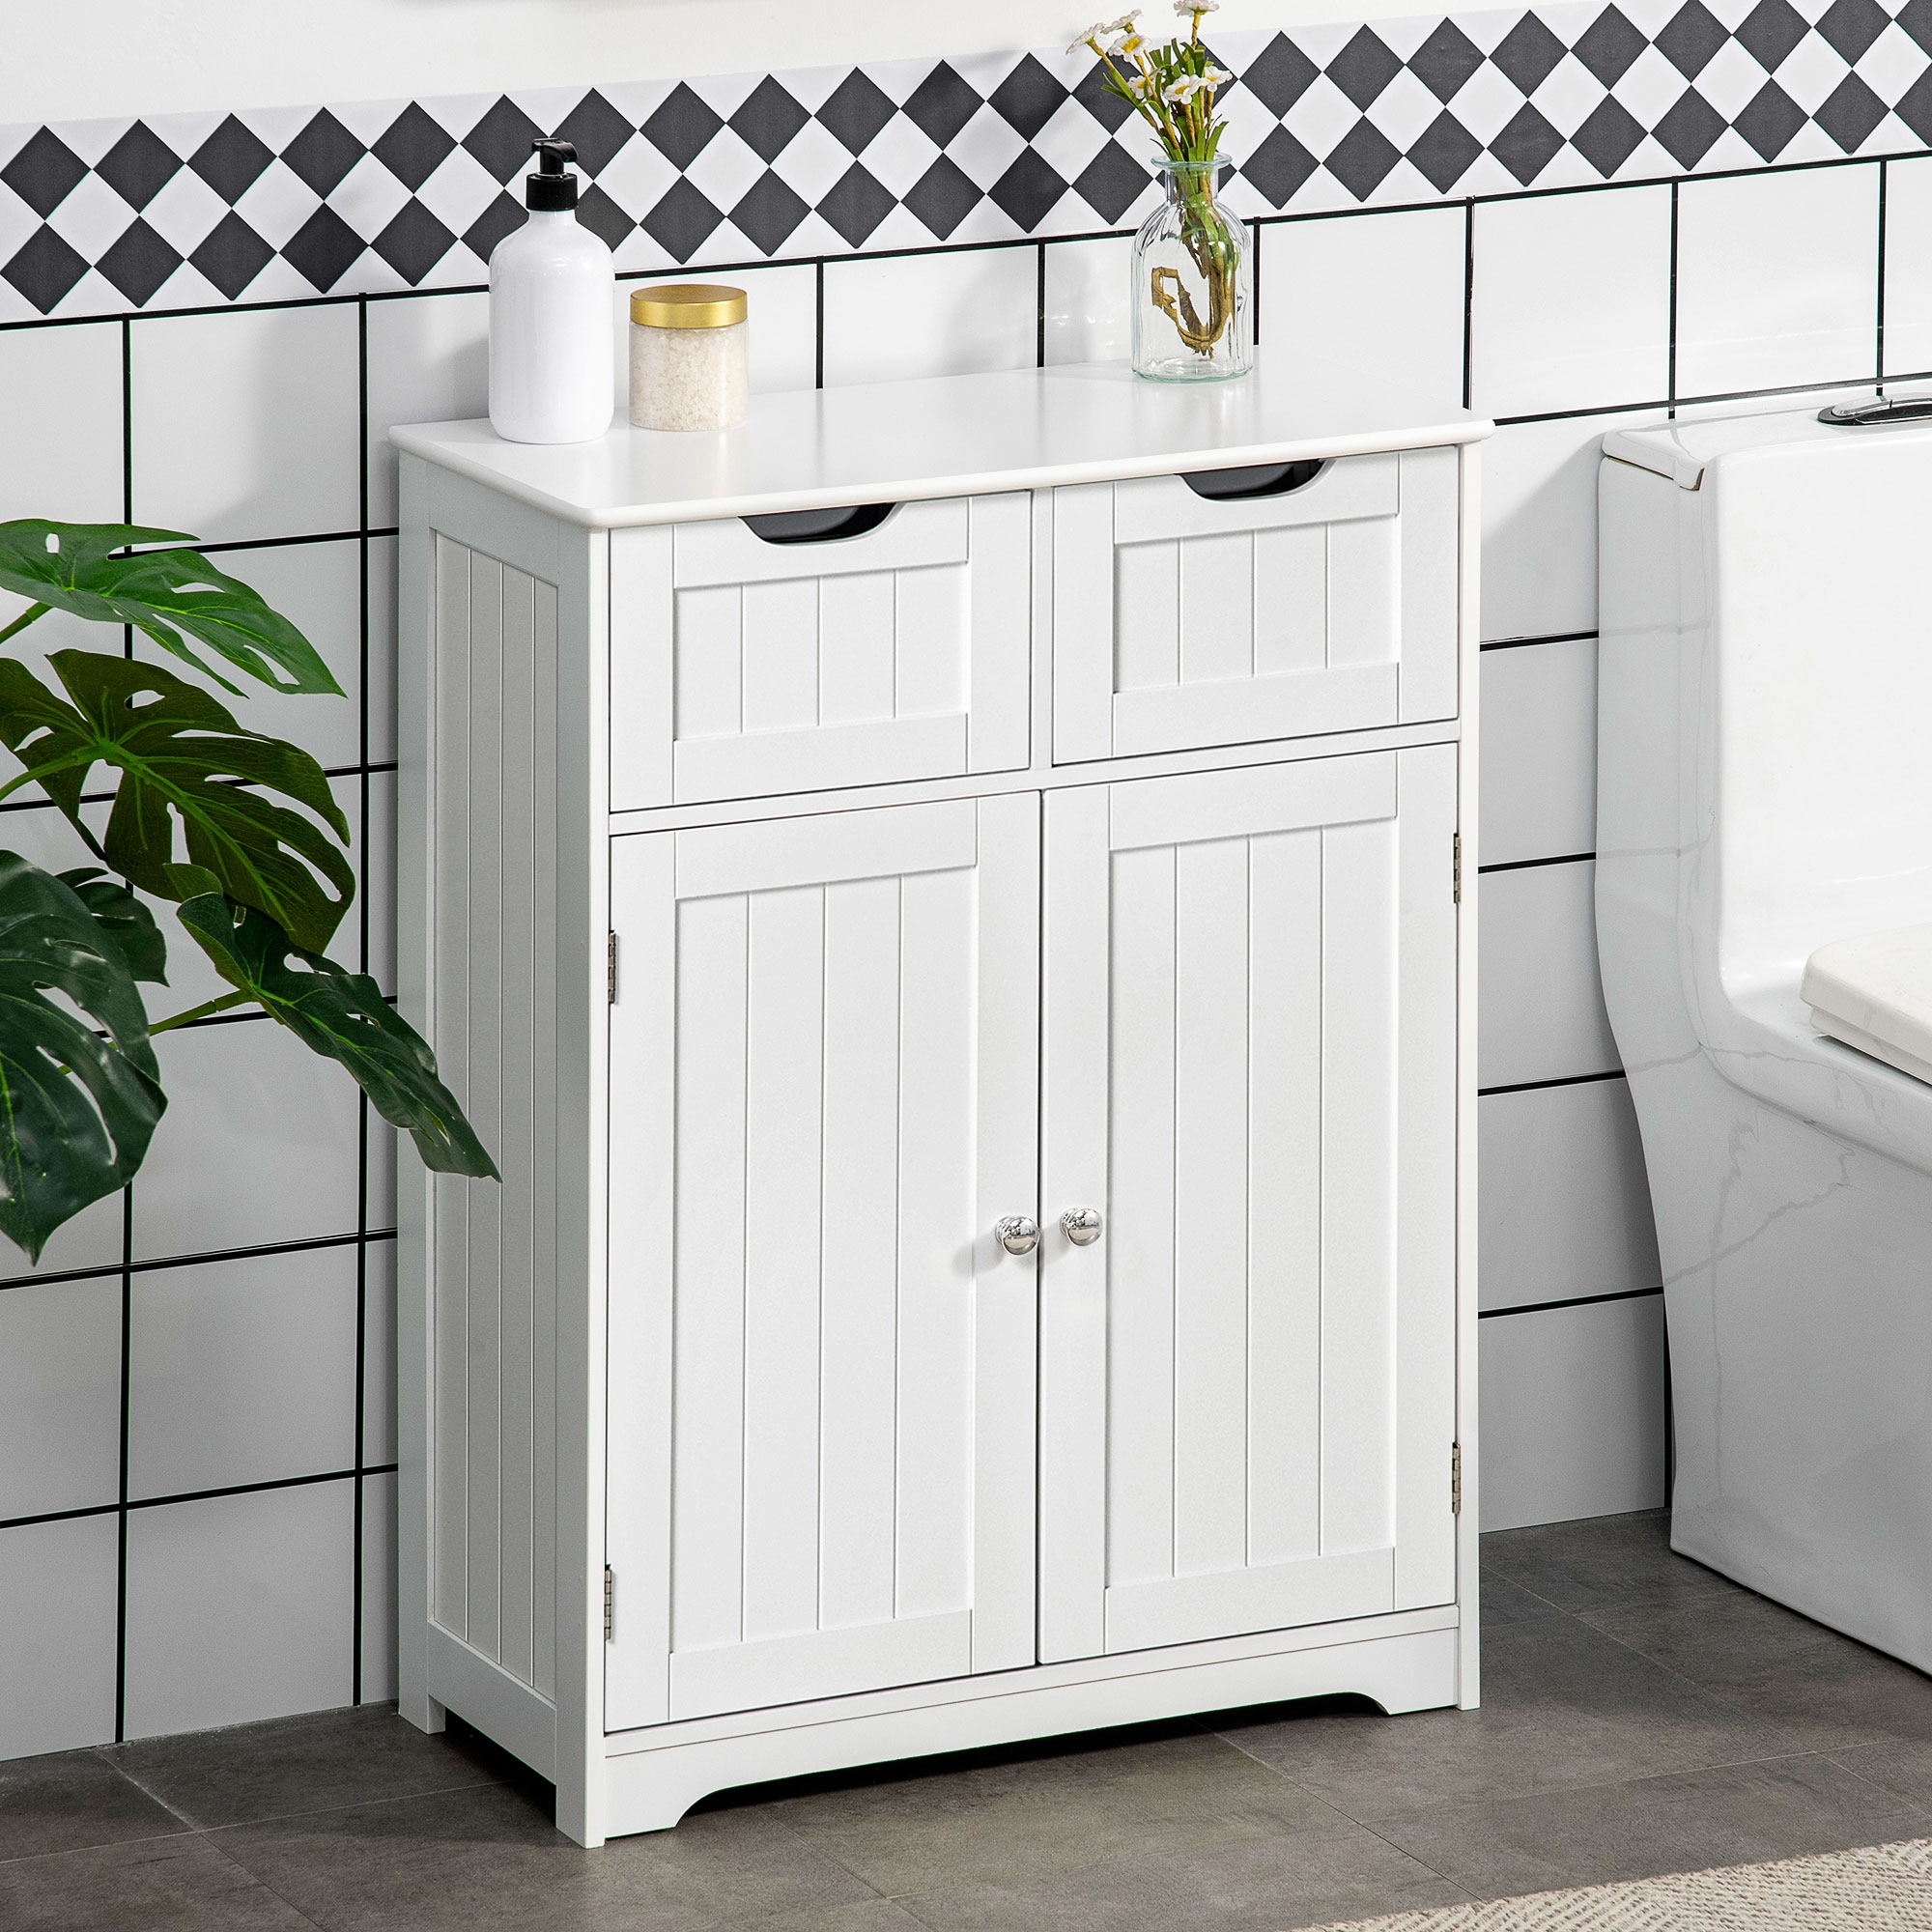 https://ak1.ostkcdn.com/images/products/is/images/direct/c668ceb240c3381d9e2463169344ac6fe19ef91d/kleankin-Freestanding-Bathroom-Storage-Cabinet%2C-Floor-Cupboard-with-2-Drawers%2C-Adjustable-Shelf.jpg